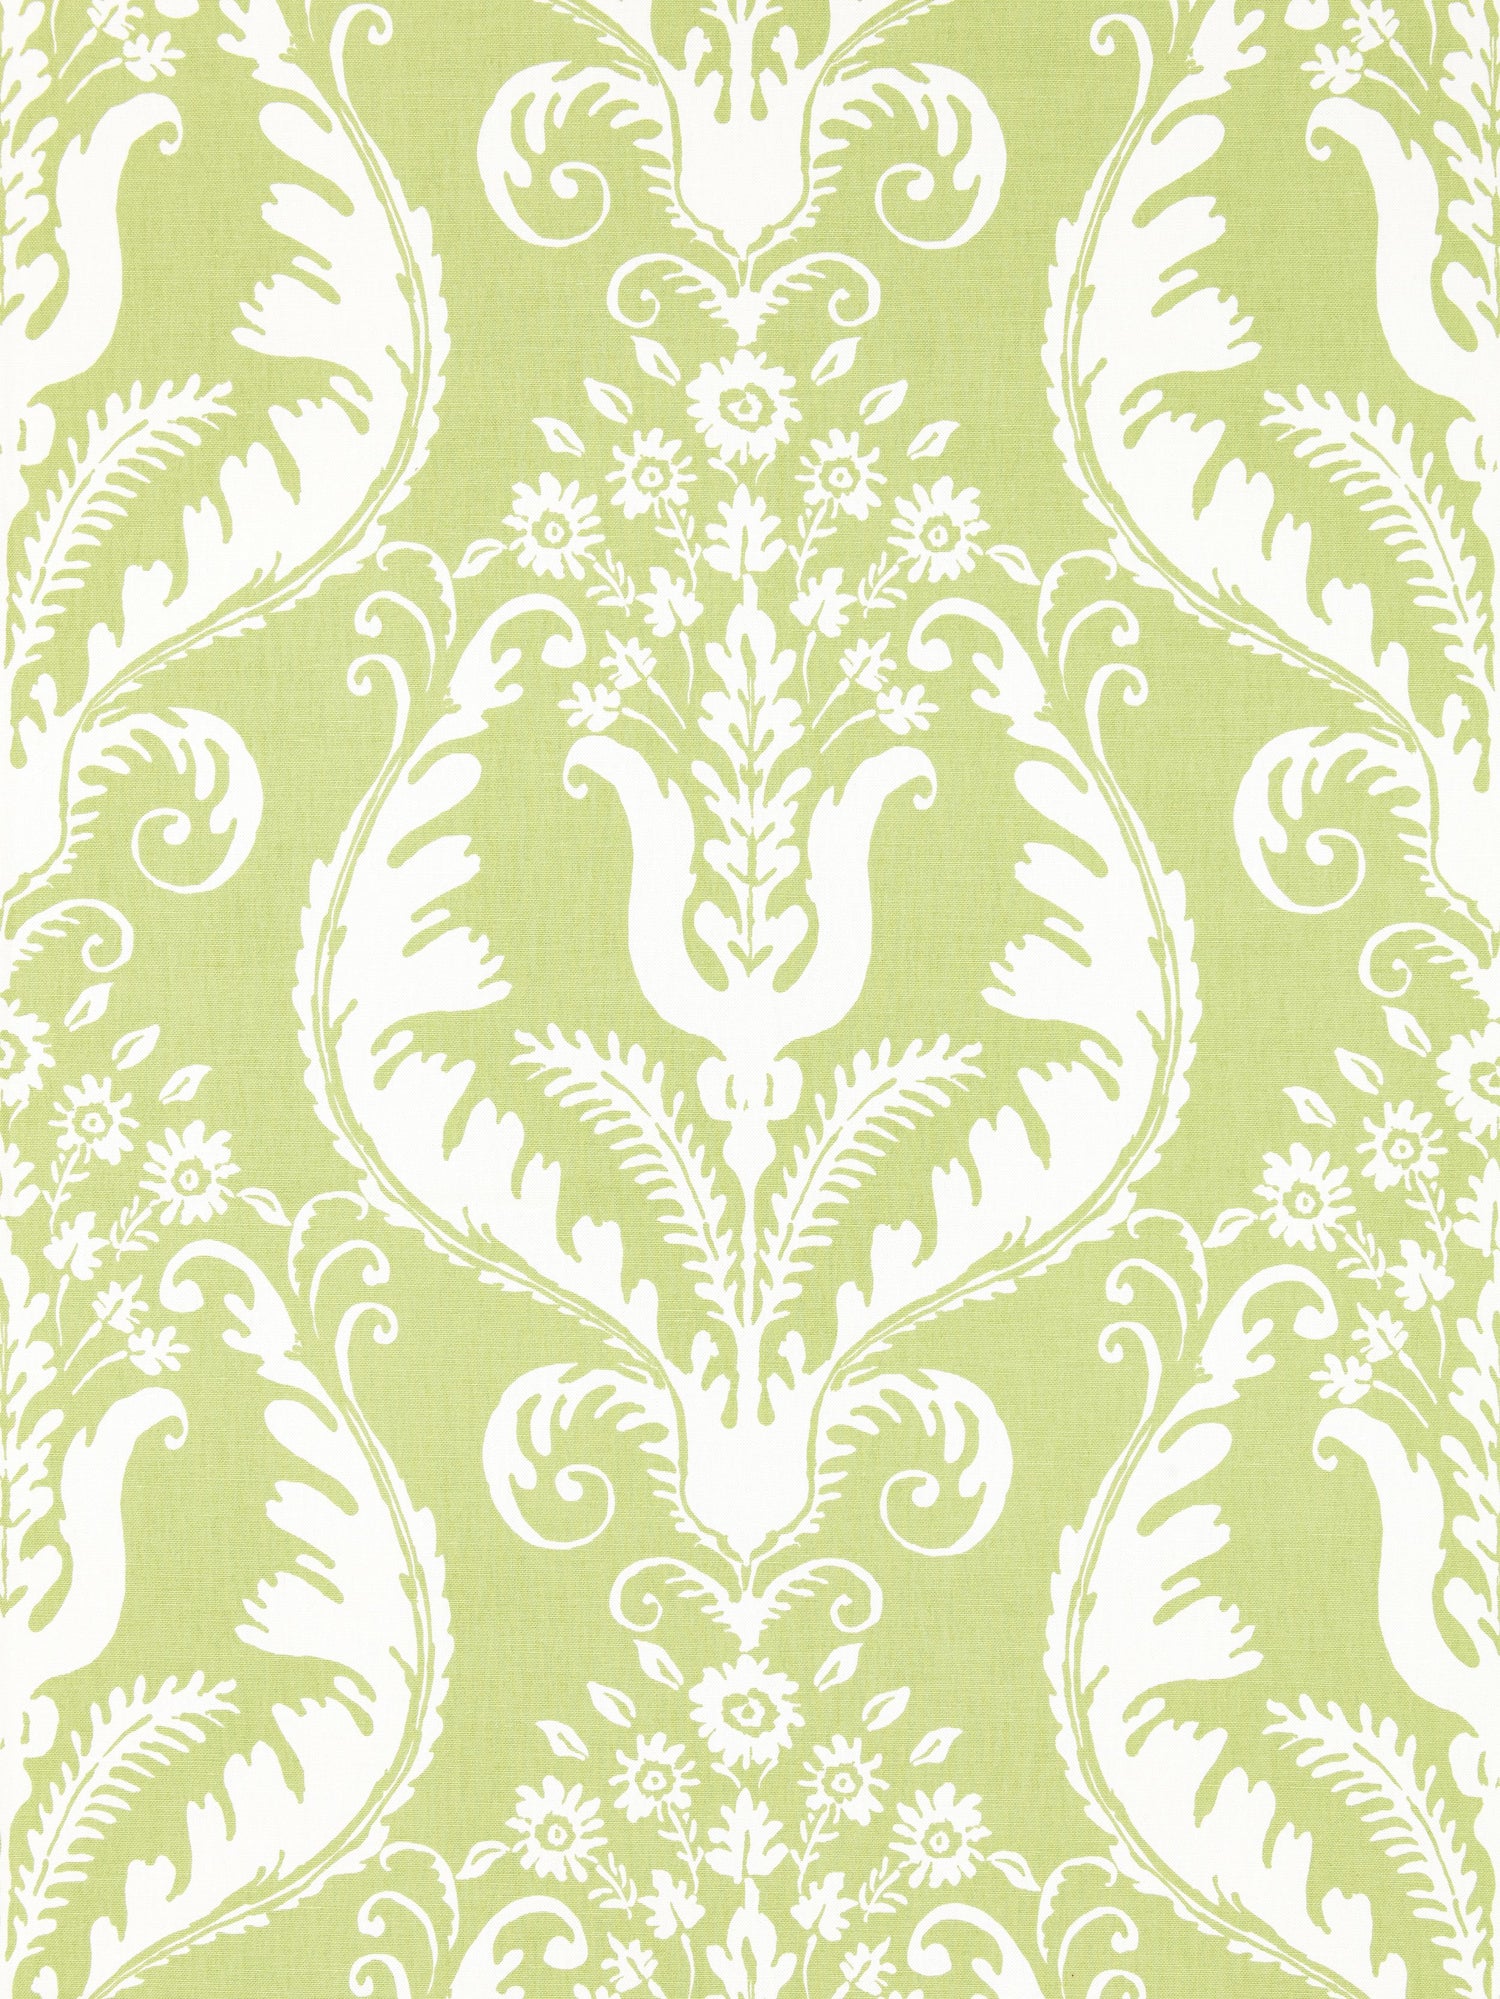 Primavera Linen Print fabric in celery color - pattern number SC 000216597 - by Scalamandre in the Scalamandre Fabrics Book 1 collection